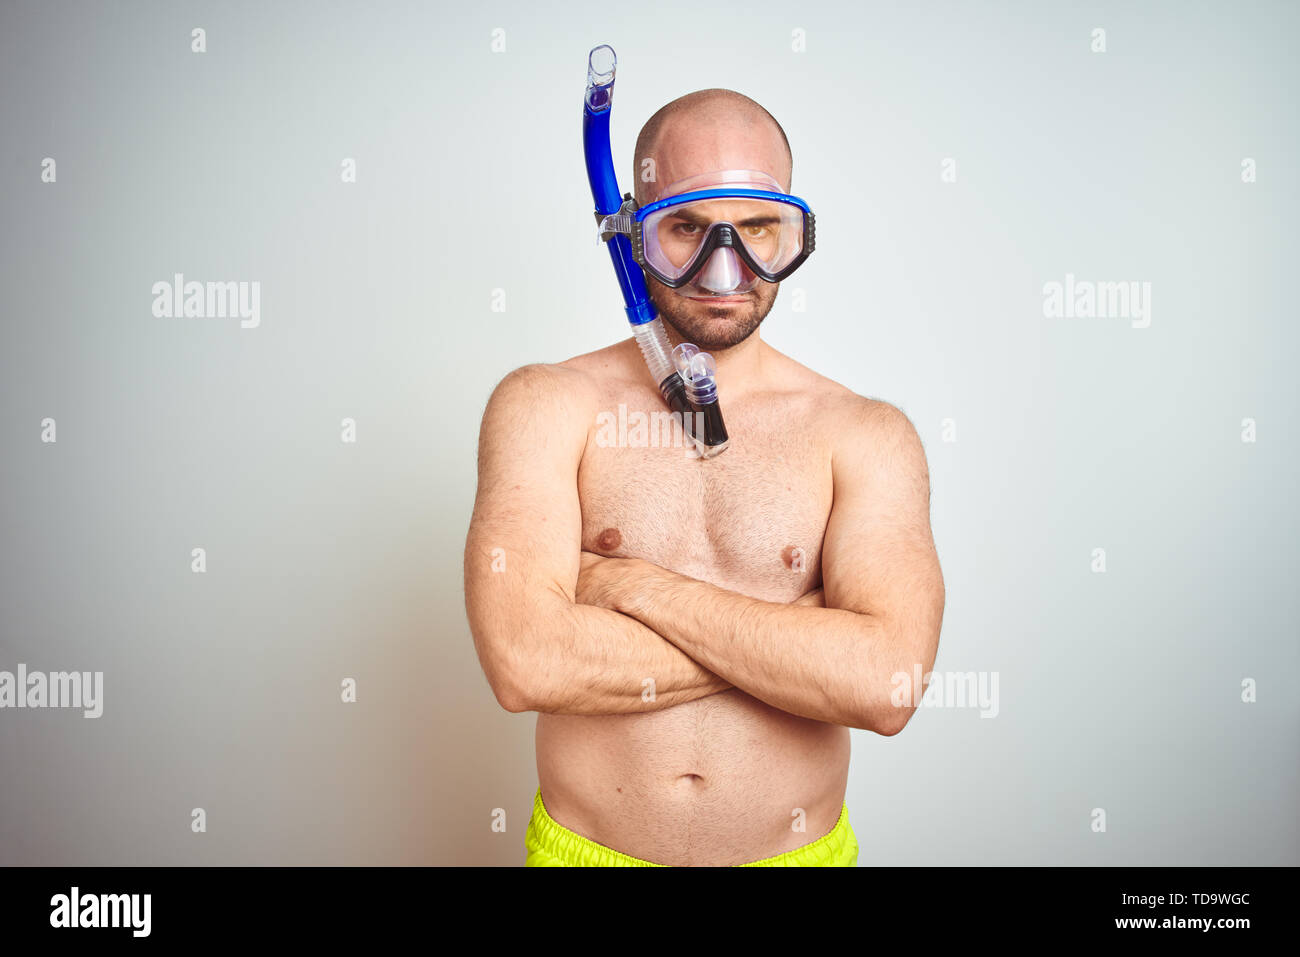 young-man-wearing-diving-snorkel-goggles-equipent-over-isolated-background-skeptic-and-nervous-disapproving-expression-on-face-with-crossed-arms-neg-TD9WGC.jpg